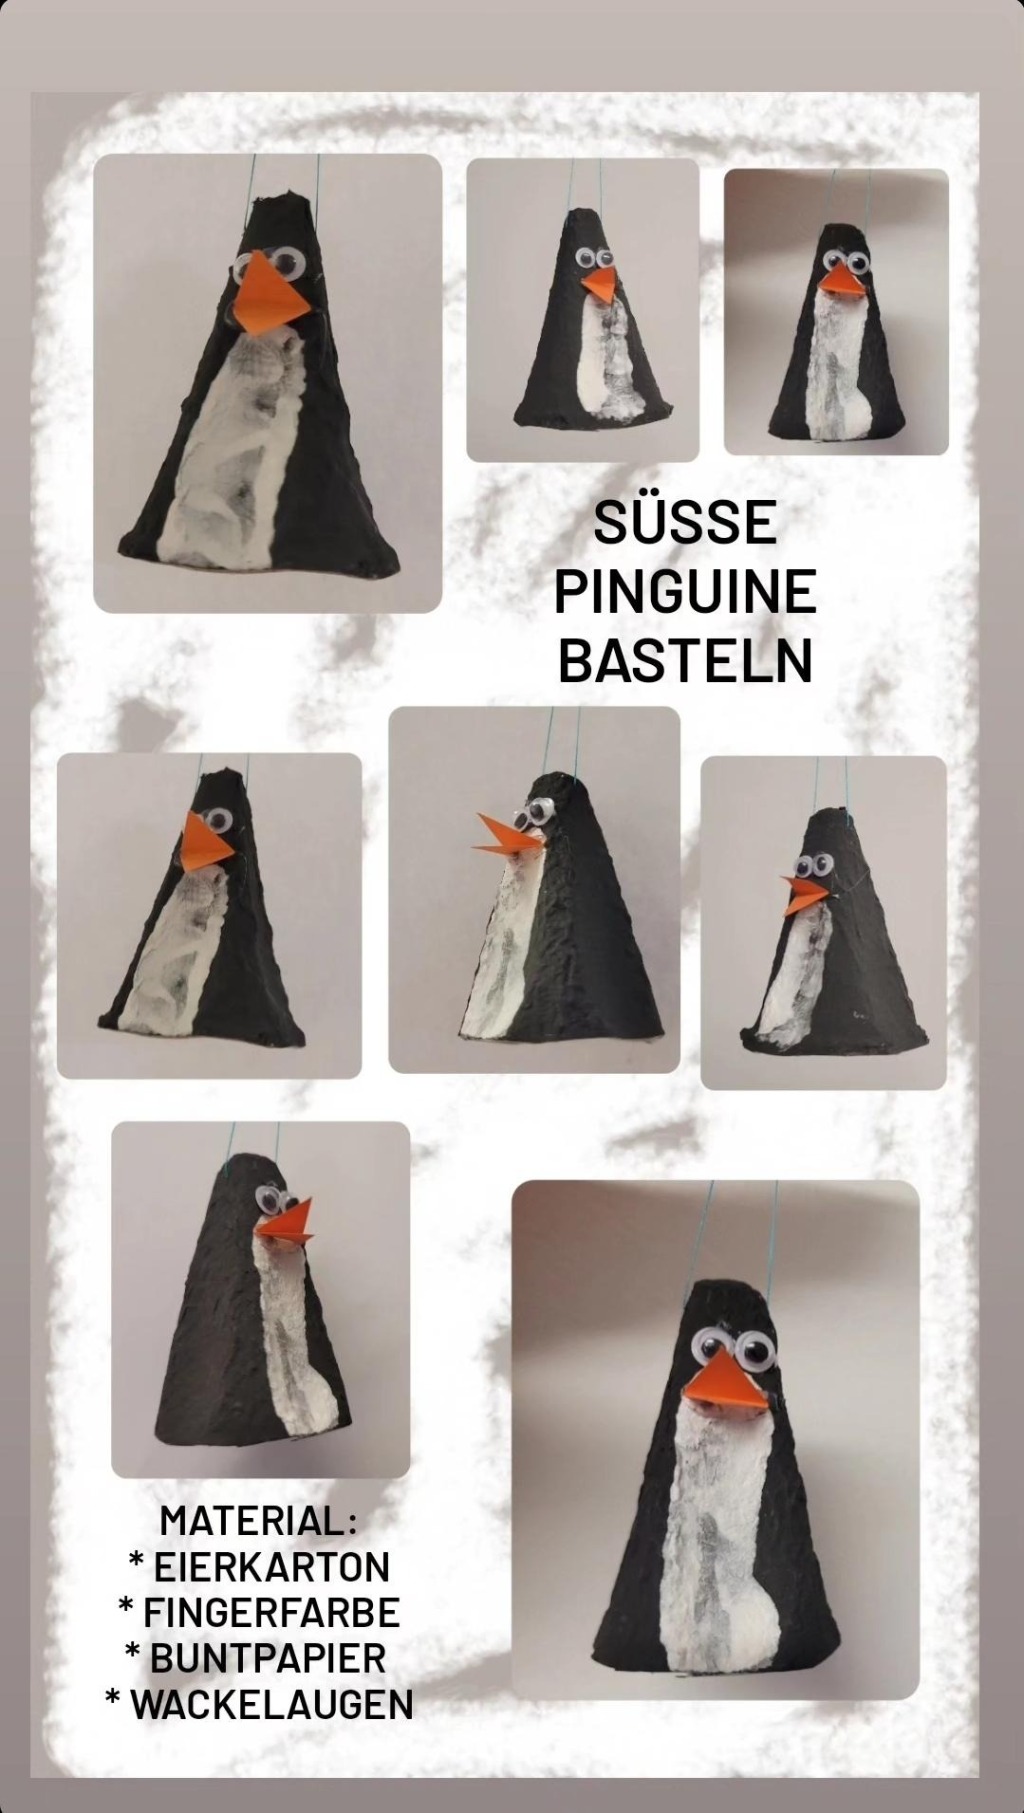 Cuddly penguins!/Knuffige Pinguine!